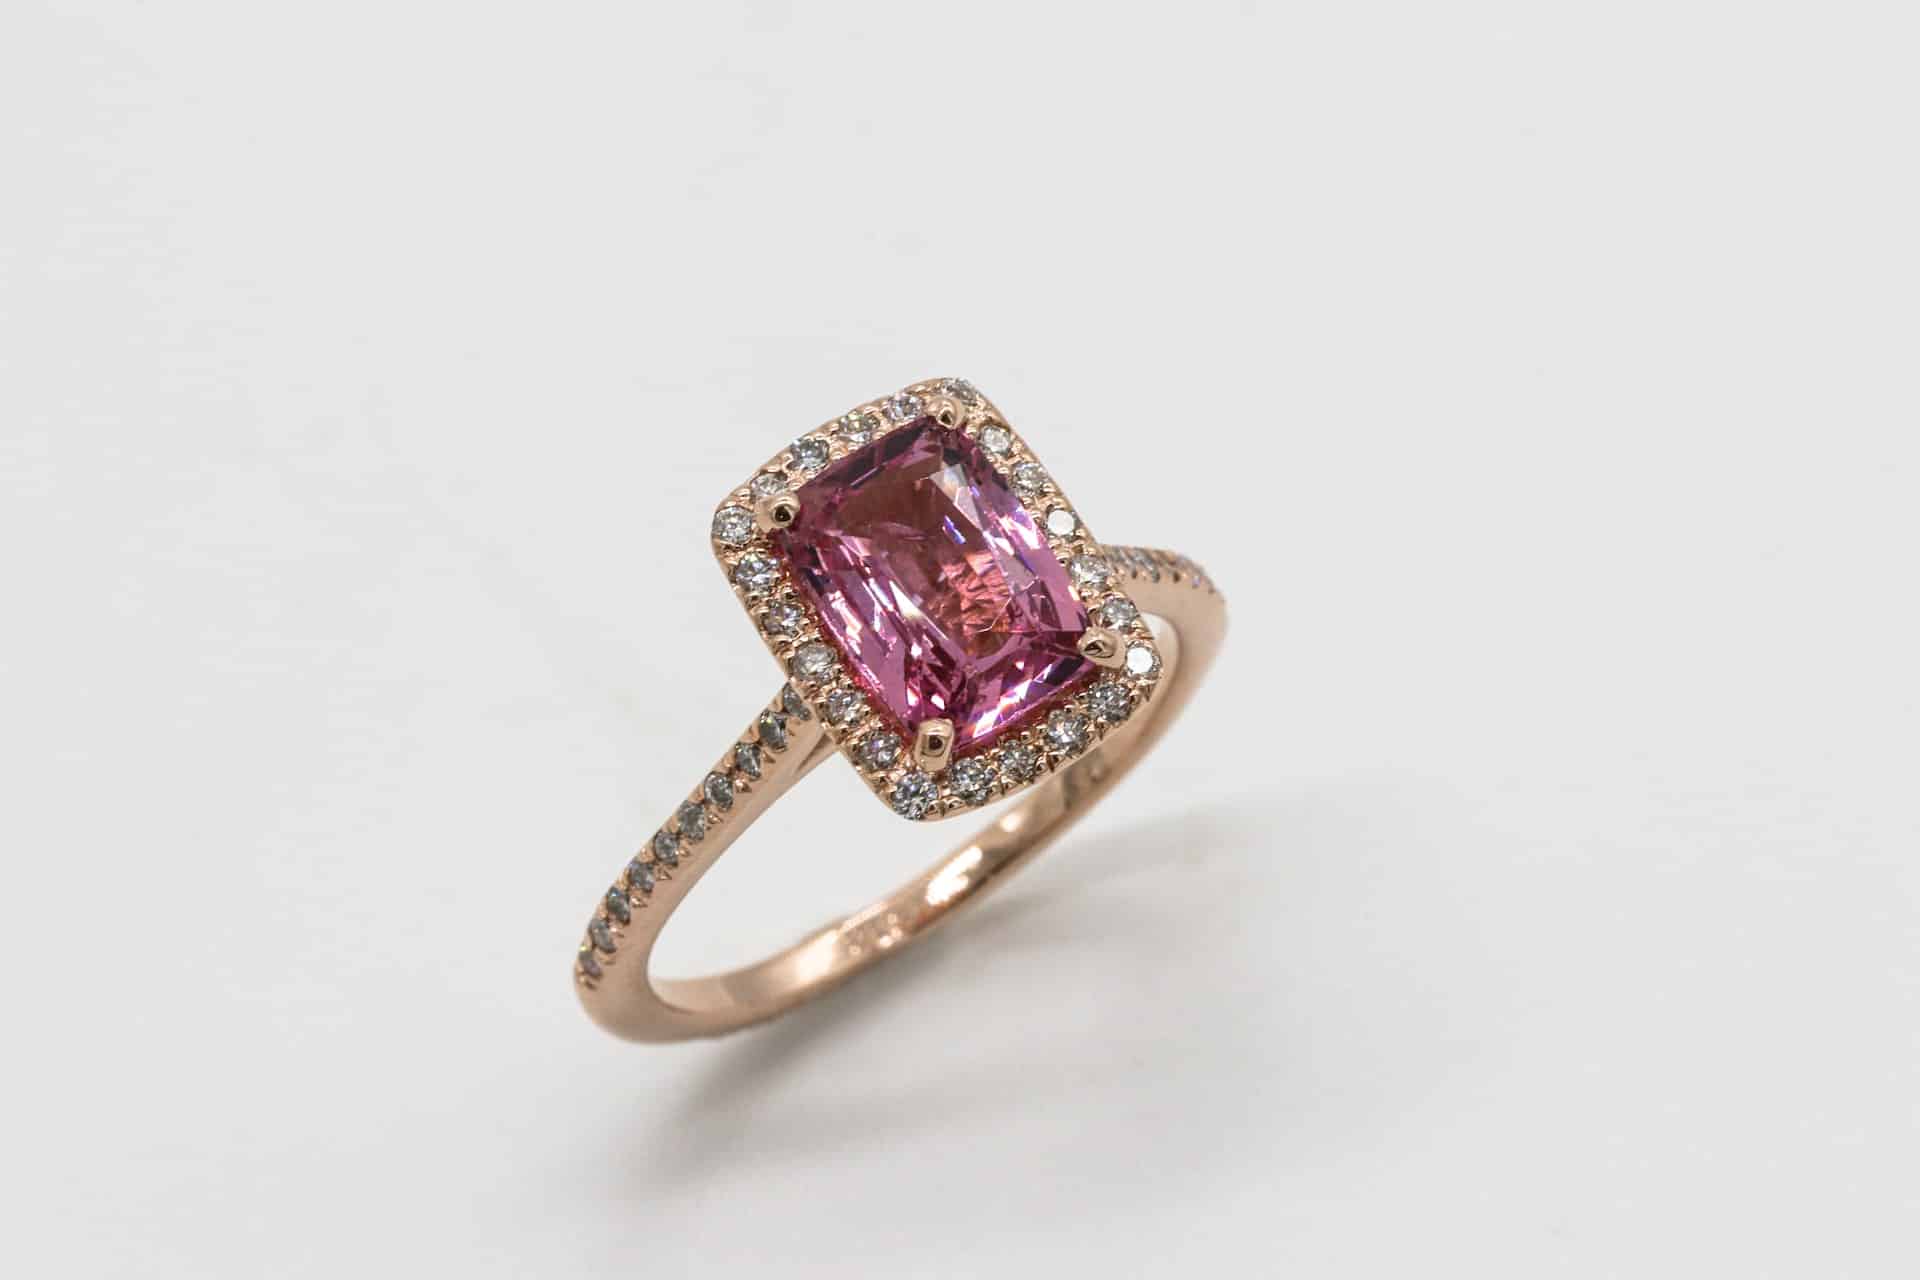 5 Coloured Diamond Engagement Ring Designs That Stand Out